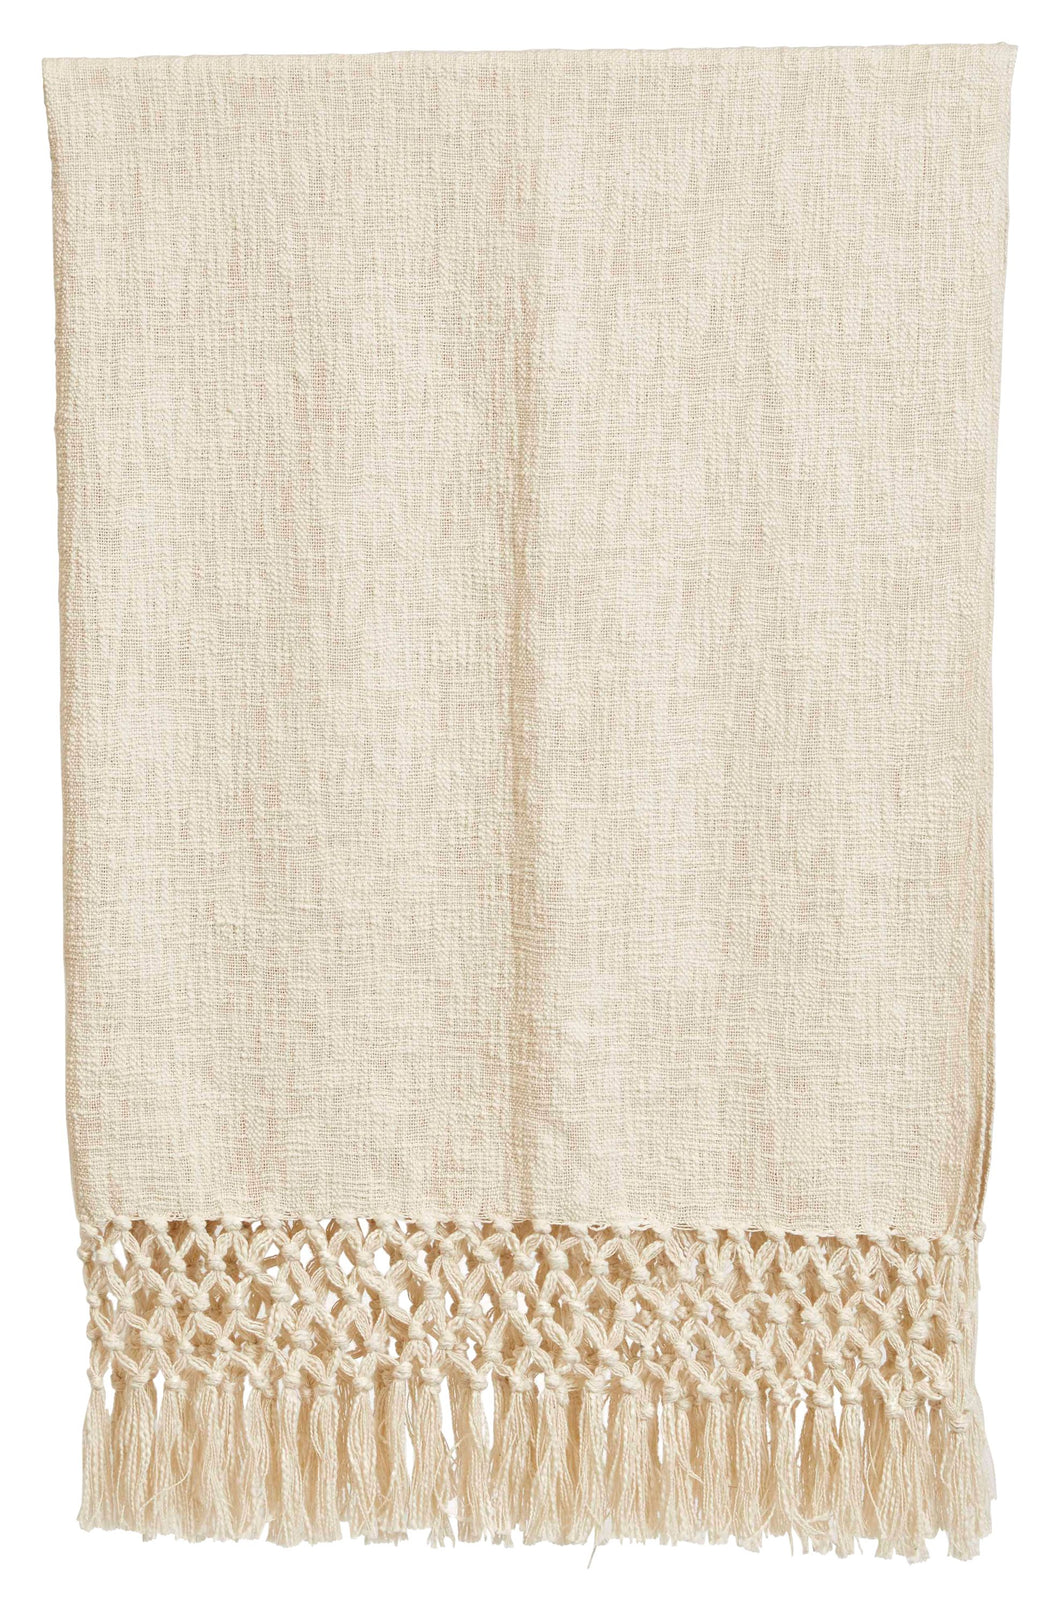 Cream Throw Blanket with Crochet and Fringe